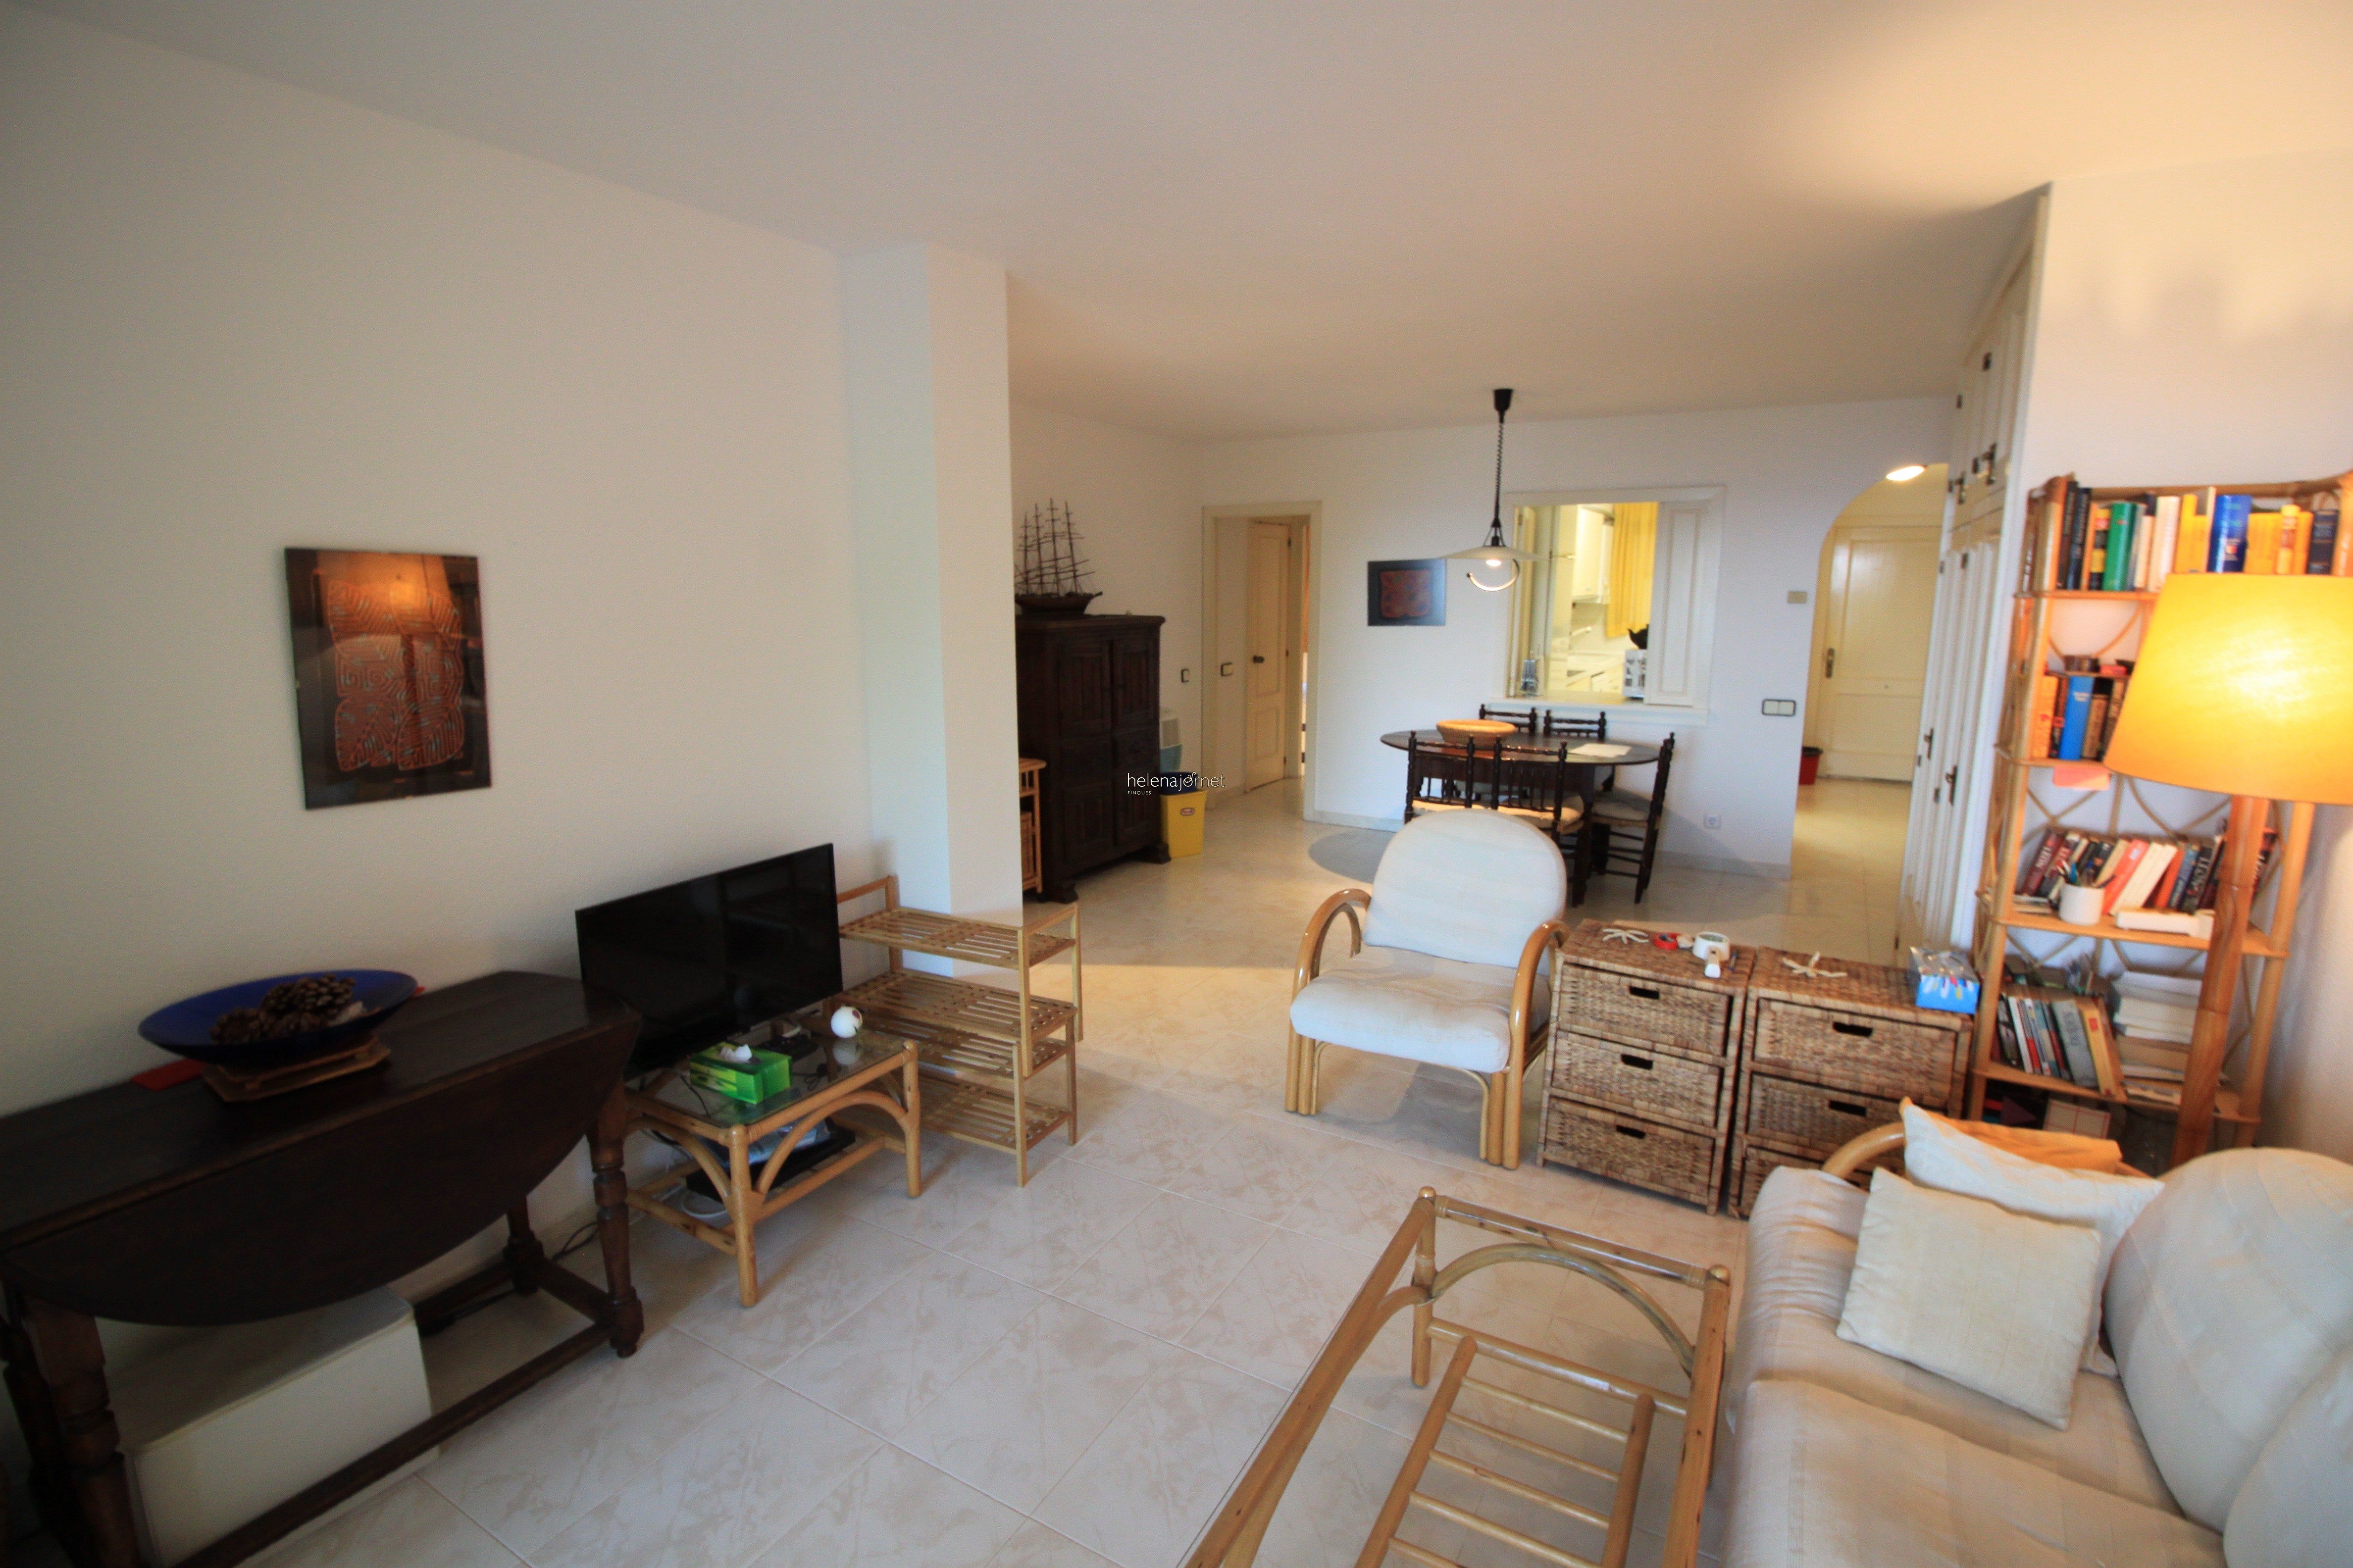 Apartment with terrace, WIFI, sea views and community pool - 46